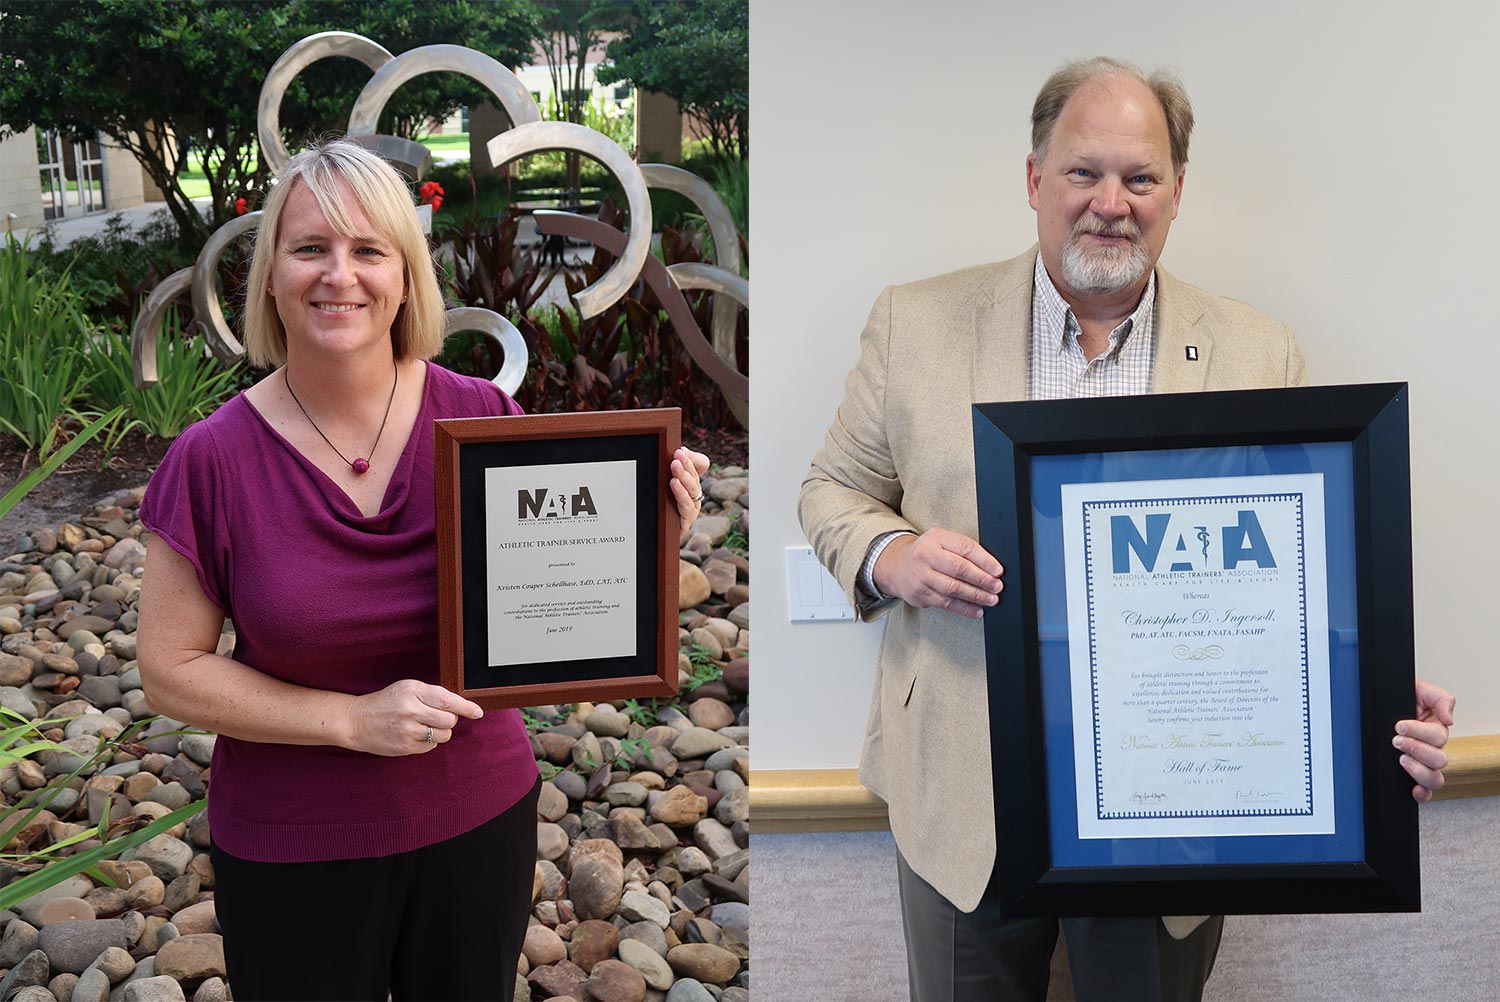 Schellhase, Ingersoll Receive Honors, Recognition from National Athletic Trainers’ Association